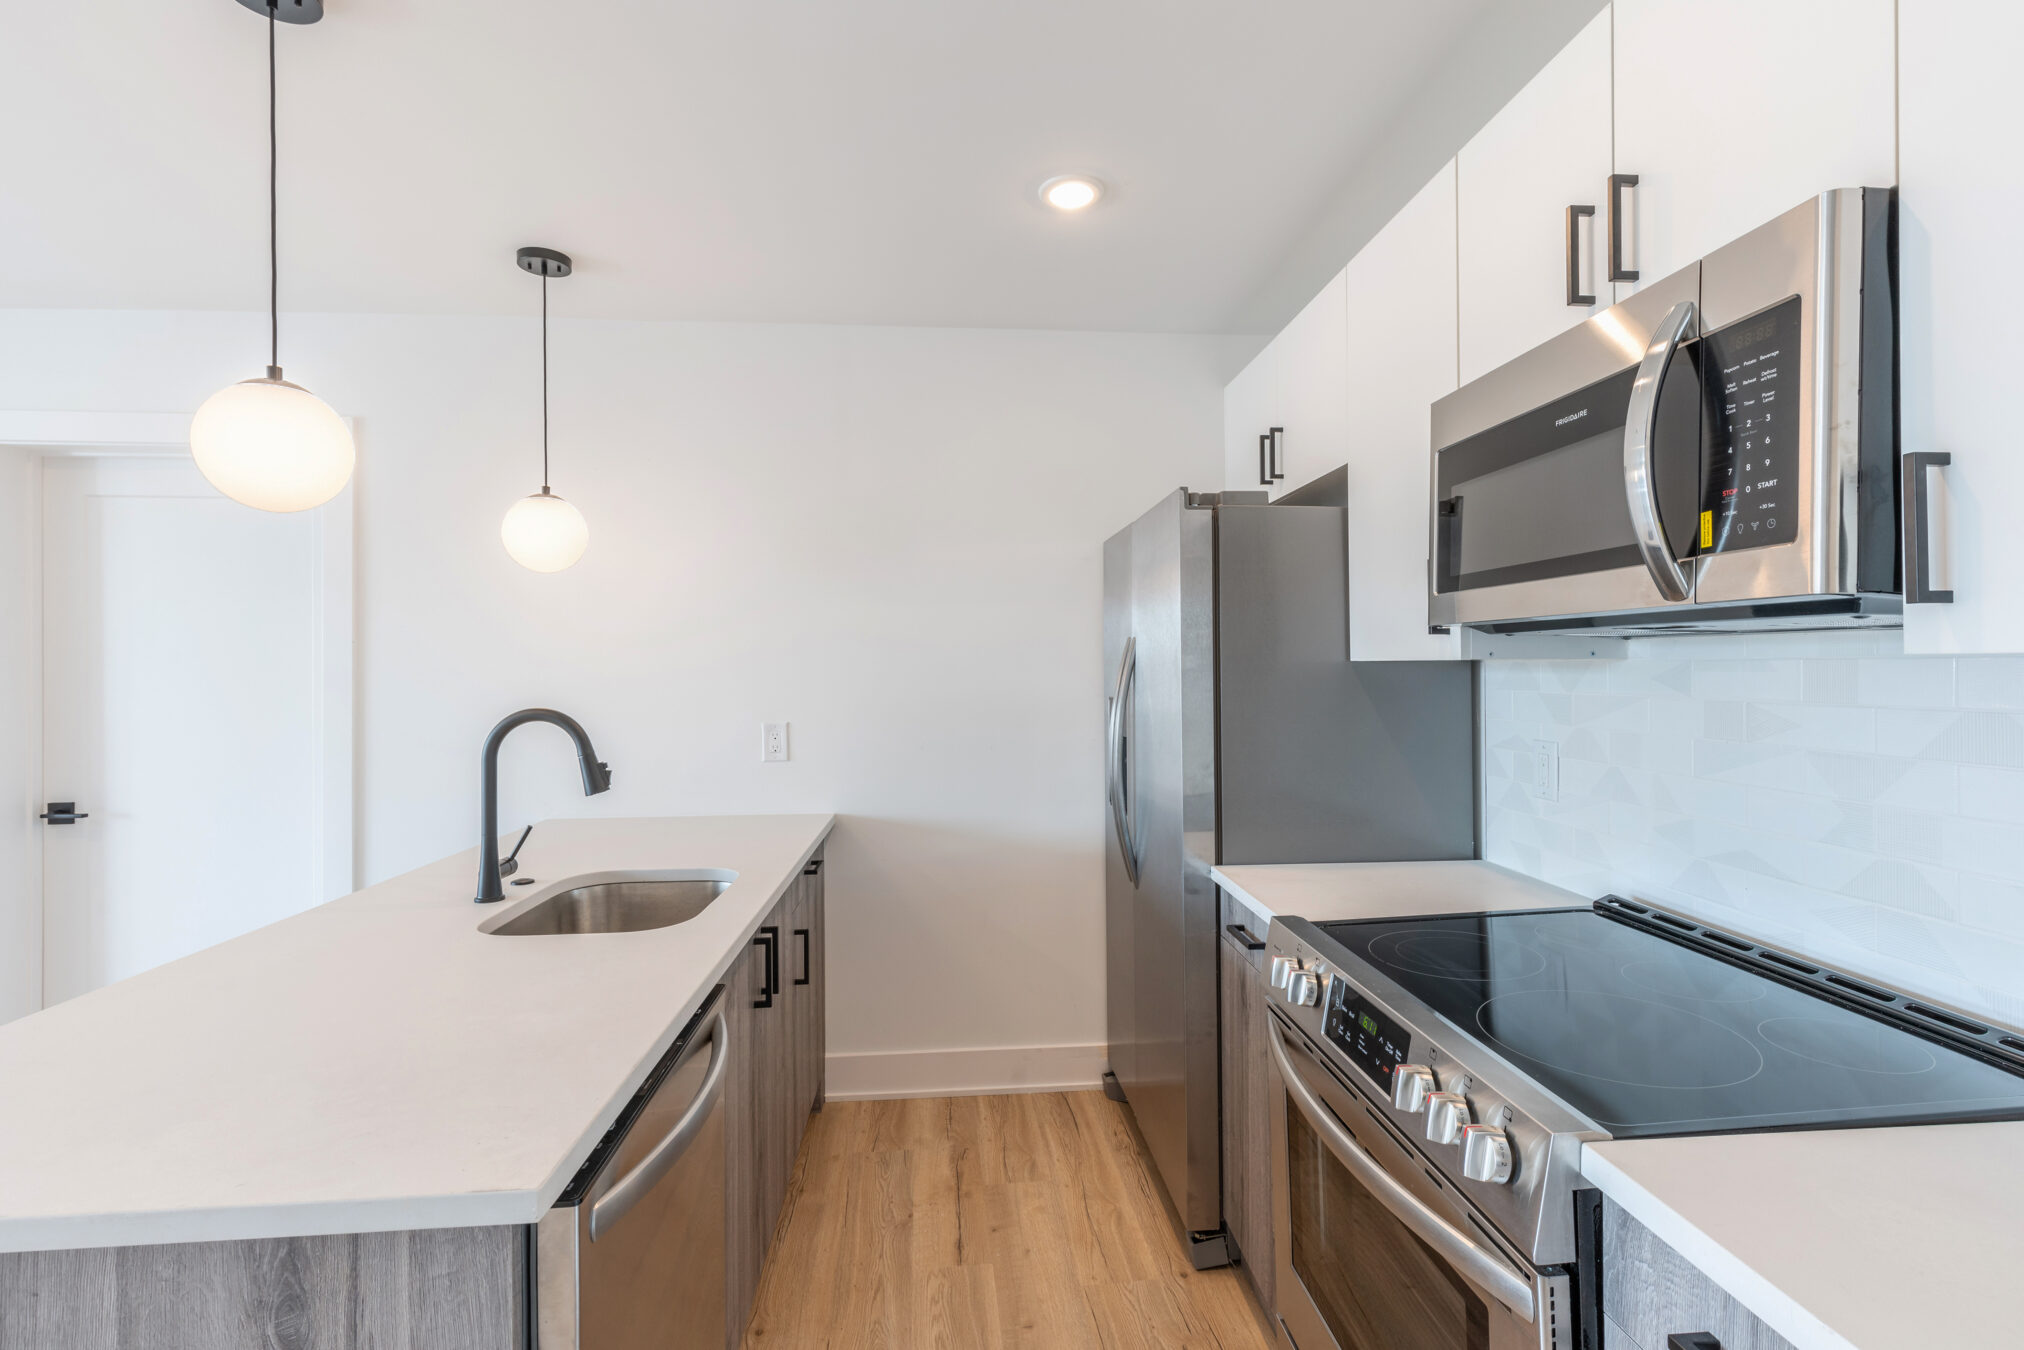 Property Photo For 629 W Girard Ave, Unit 402